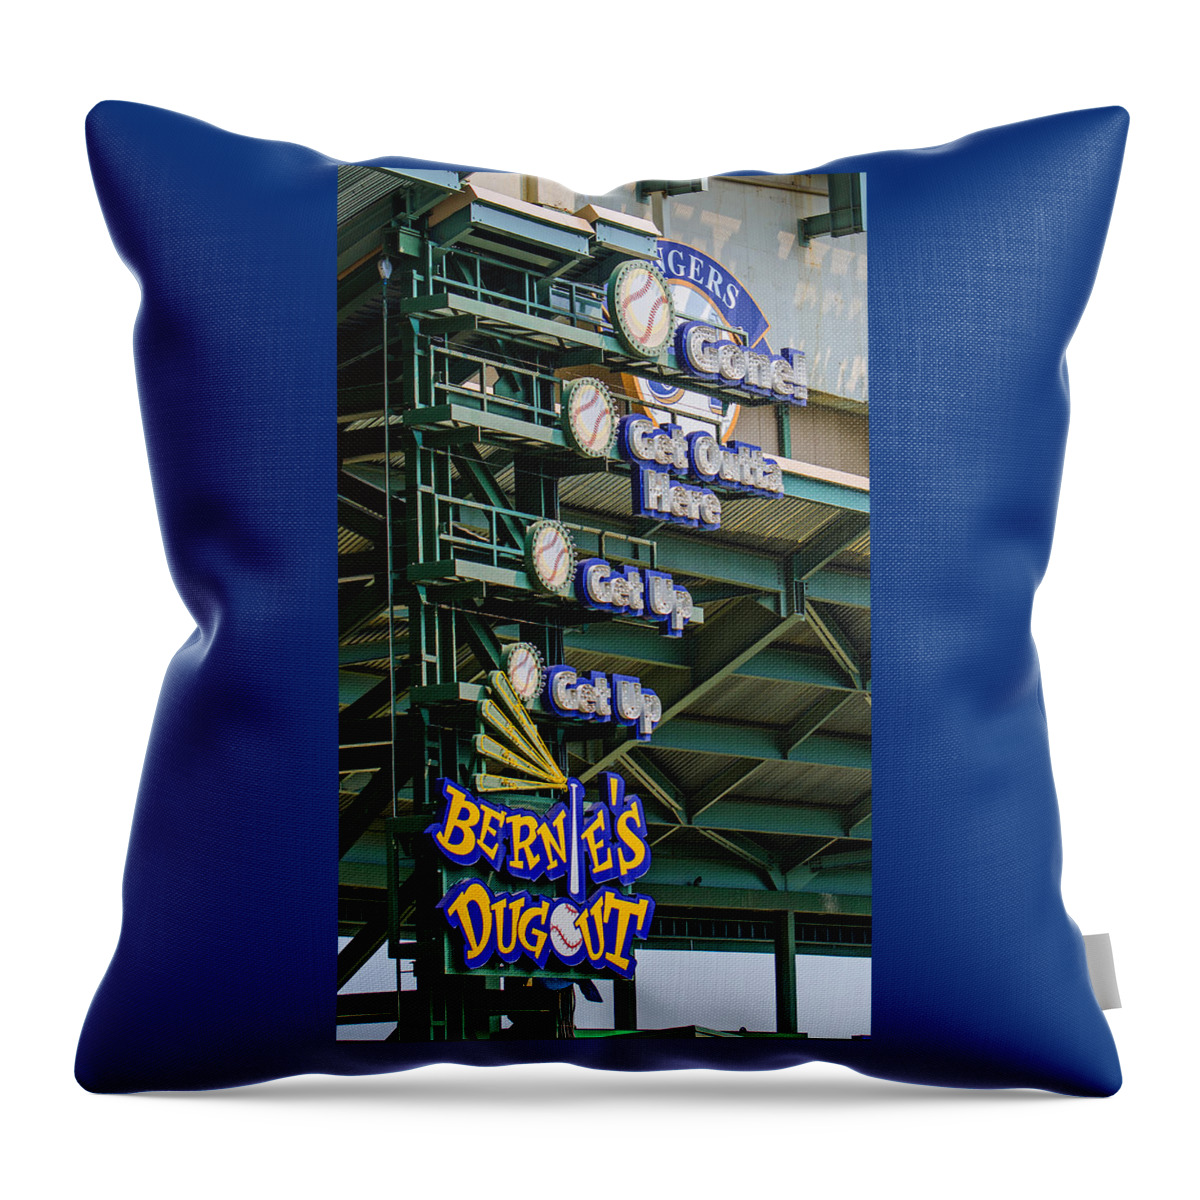 Get Outta Here Throw Pillow featuring the photograph Get Outta Here  by Susan McMenamin